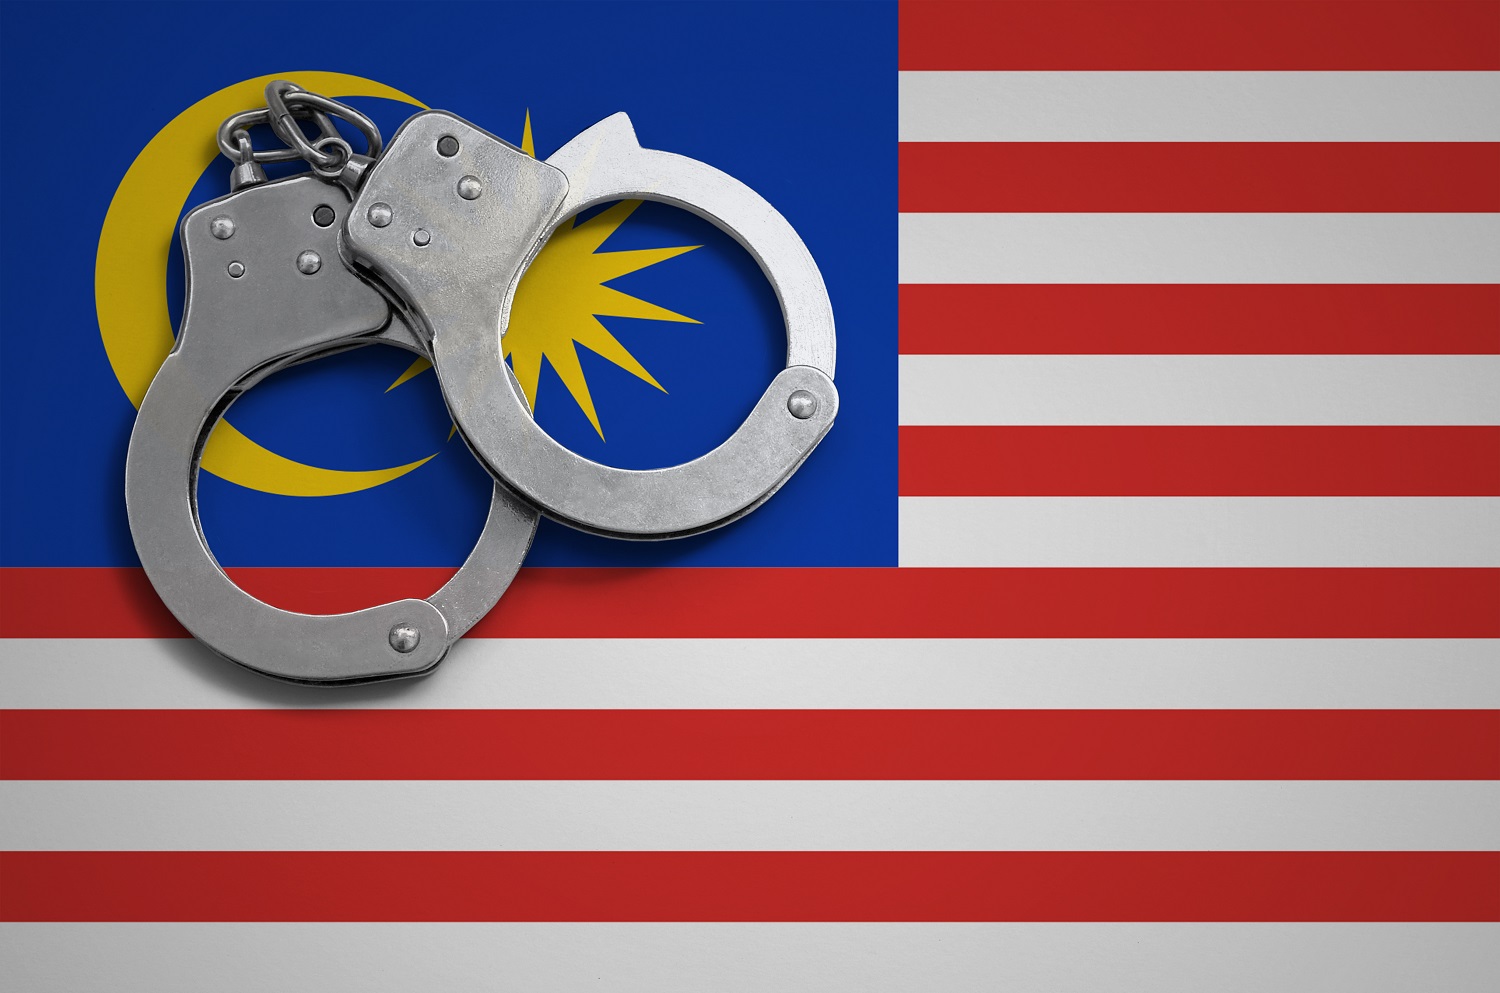 A pair of police handcuffs rests on the flag of Malaysia.